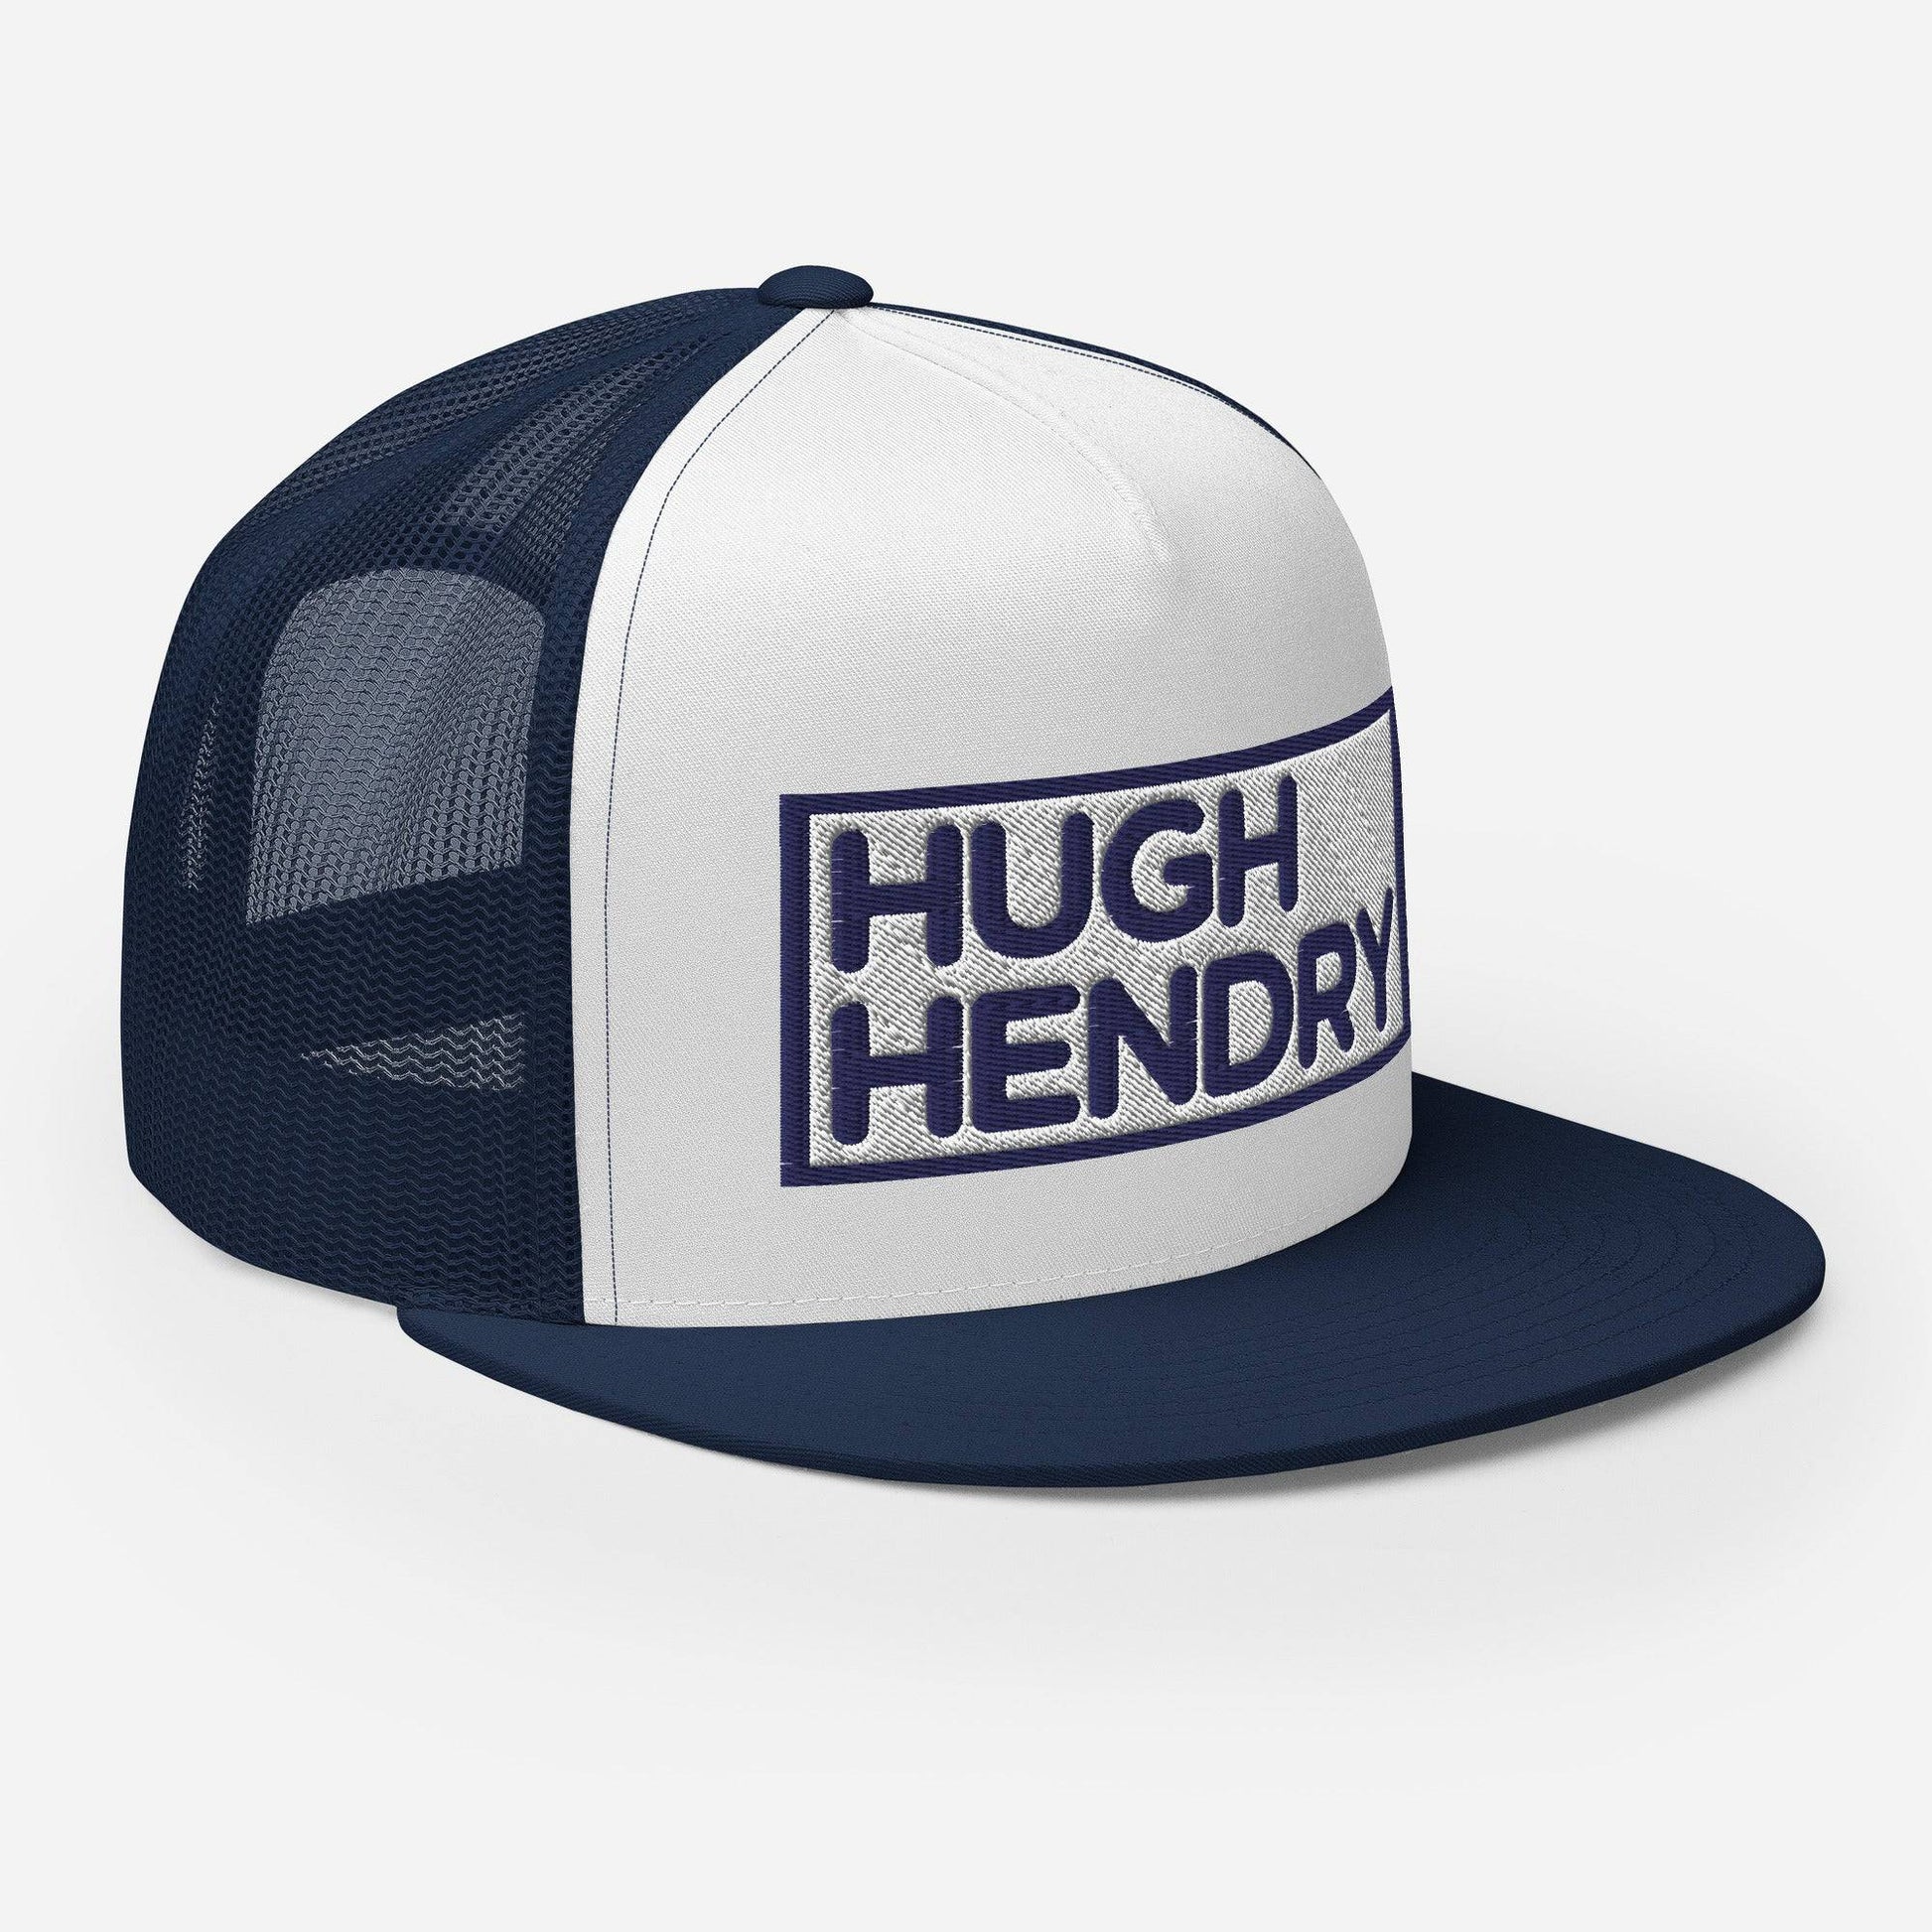 Hugh Hendry Logo-Embroidered and Mesh Navy Trucker Cap - Pixel Gallery